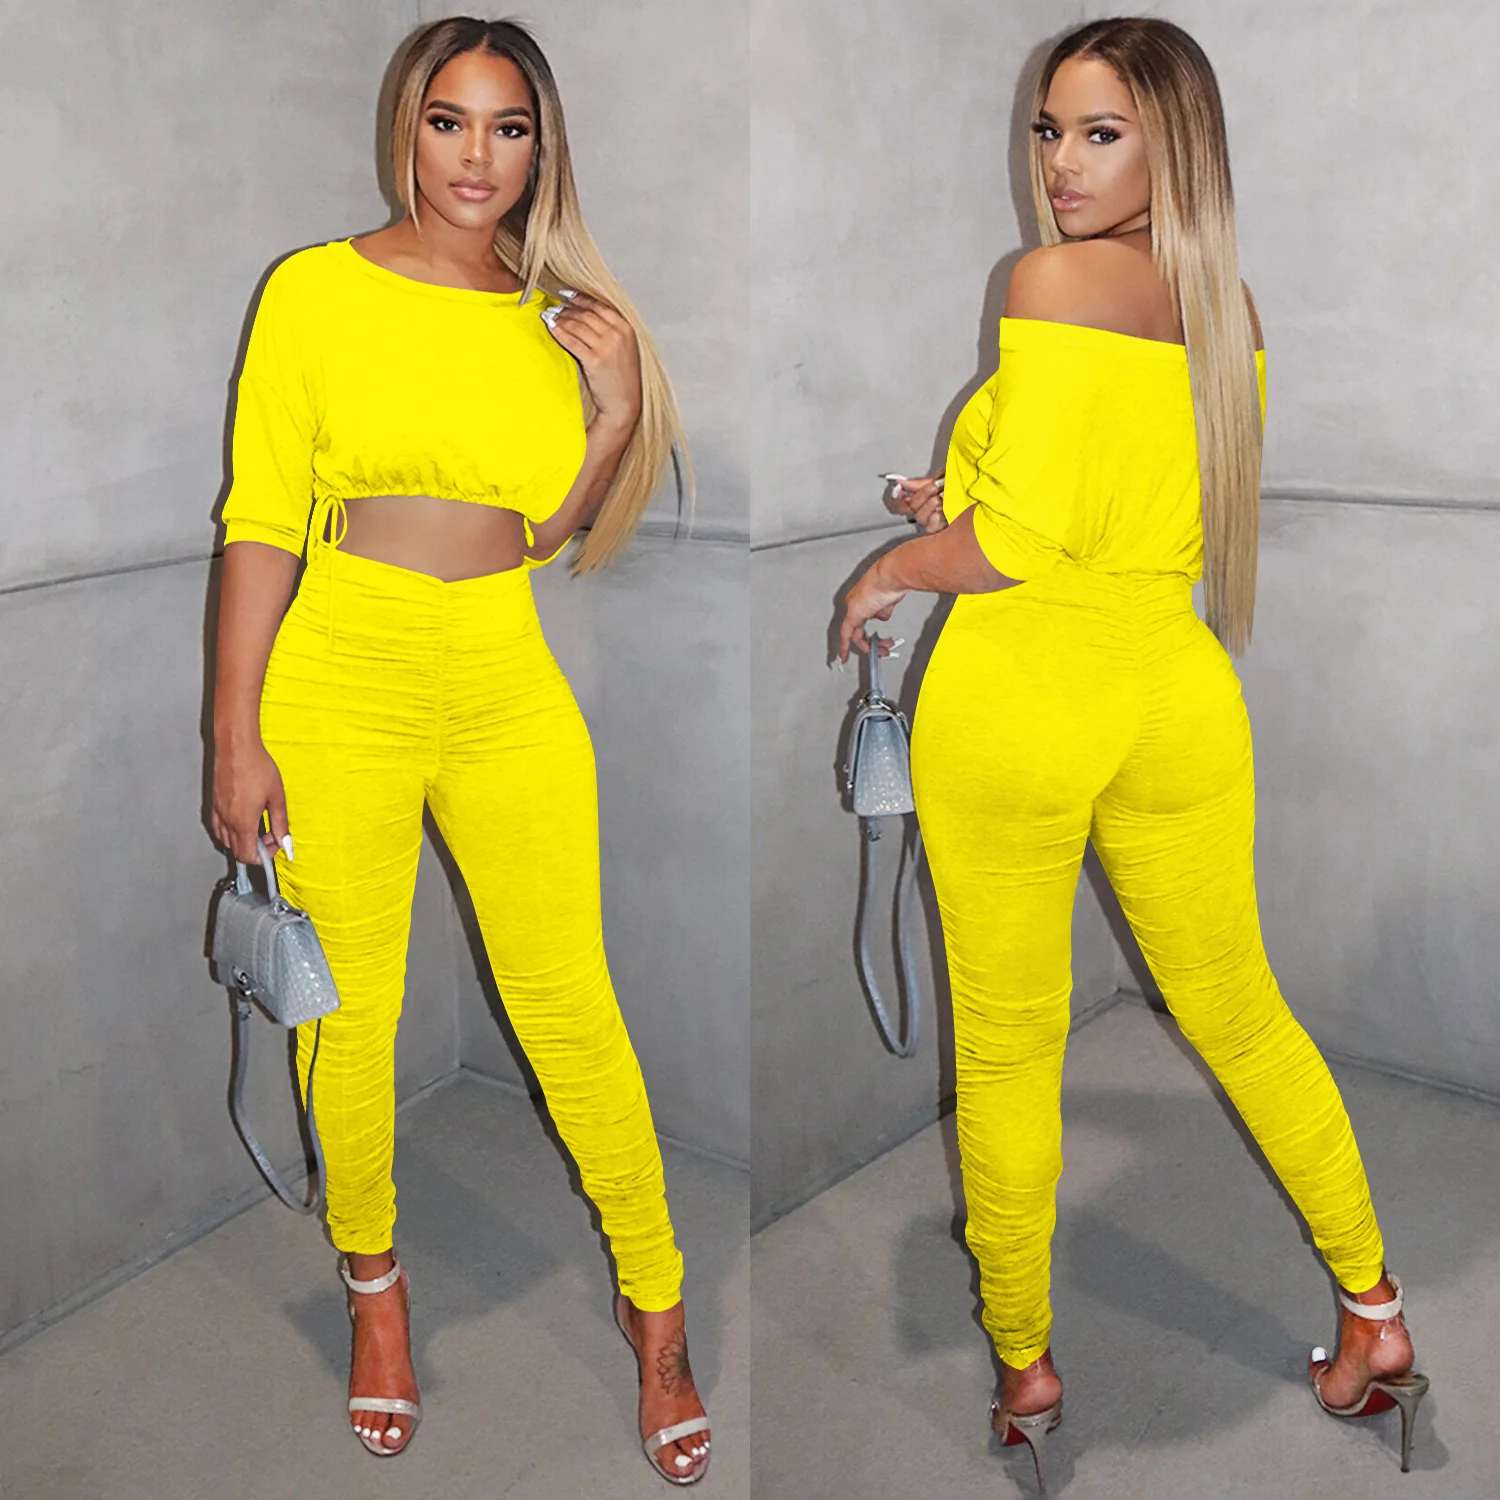 

HAOOHU 2020 new women's sets tracksuits sportwear fashion trends casual solid o-neck short tops tight slim pants 2-pc suits